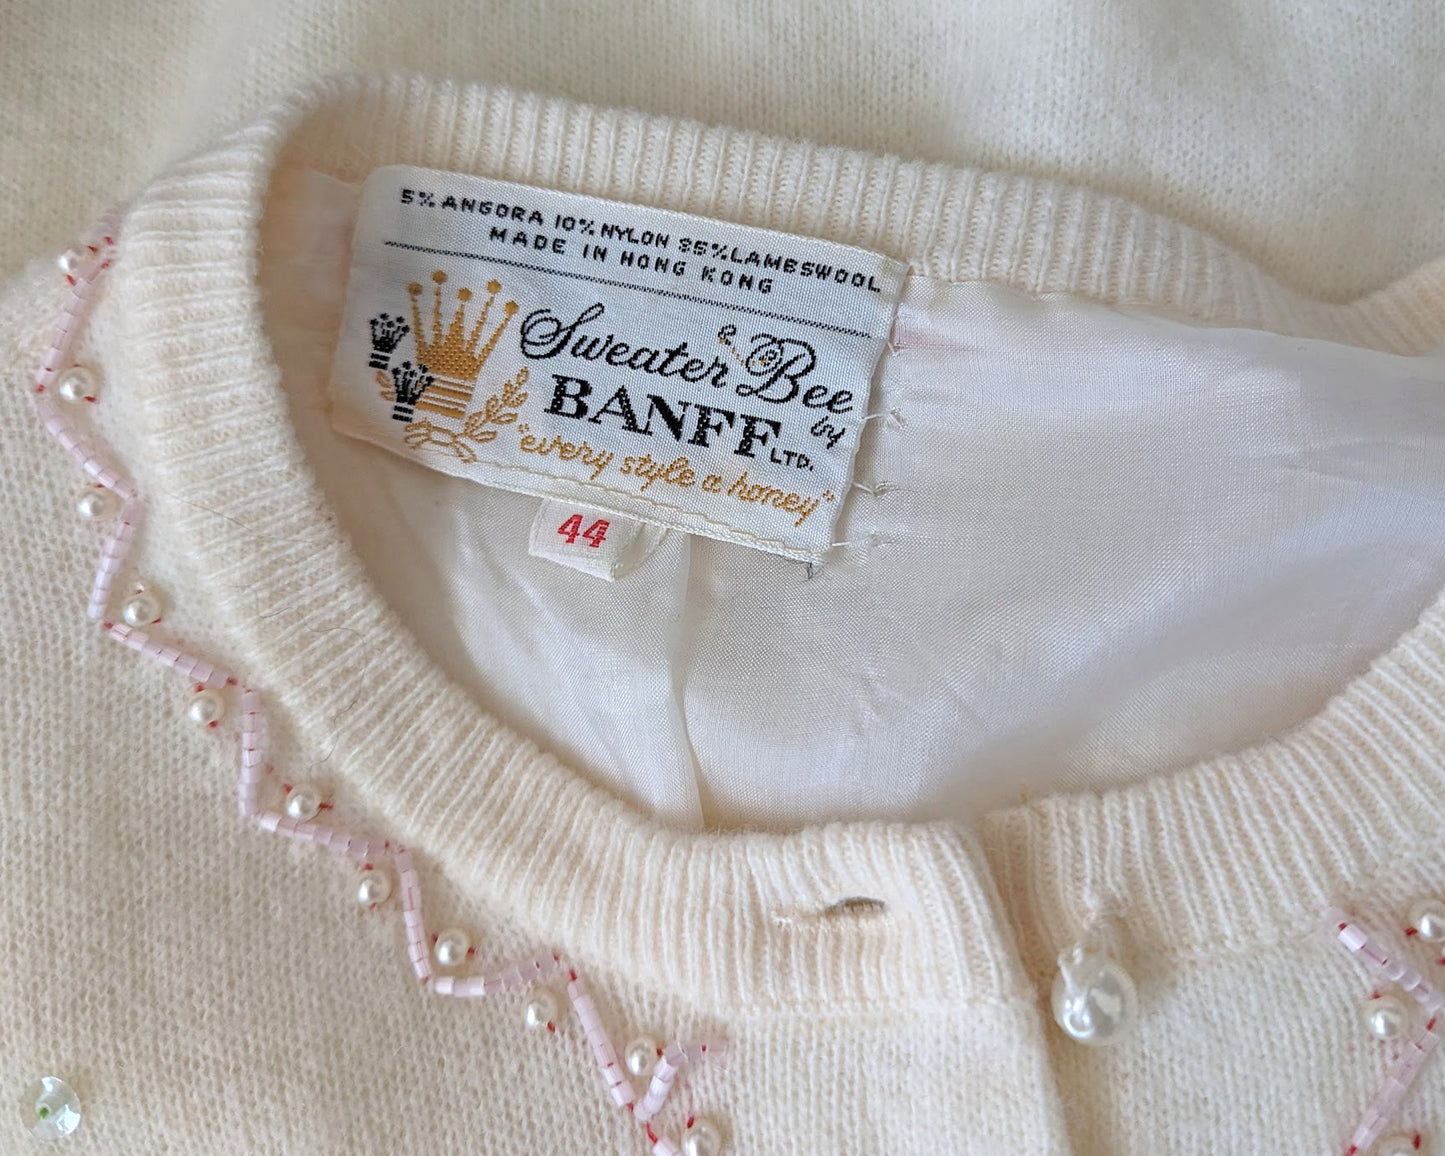 close up of the tag which says Sweater Bee by Banff LTD